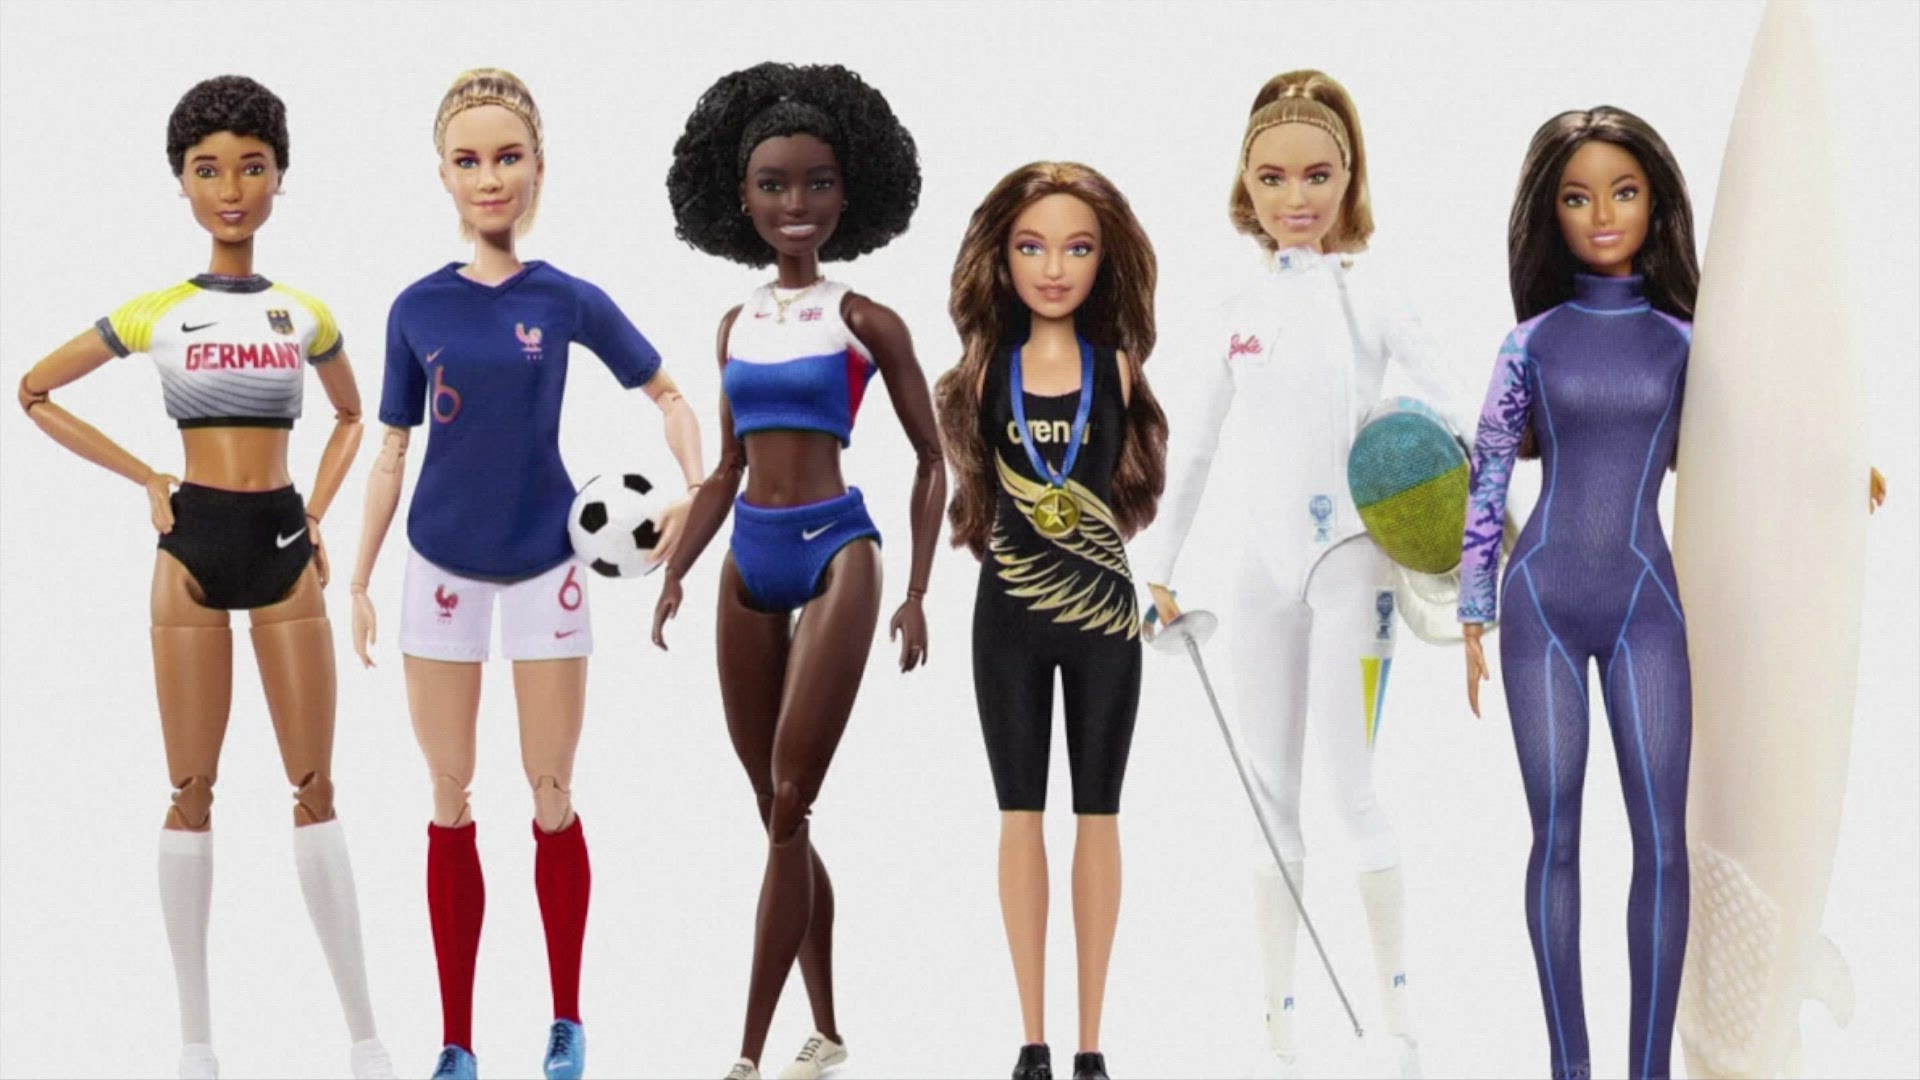 Ahead of the 2020 Olympics in Tokyo, Barbie is releasing a line of female role models in the sporting world just in time for International Women's Day. Buzz60's Mercer Morrison has the story.